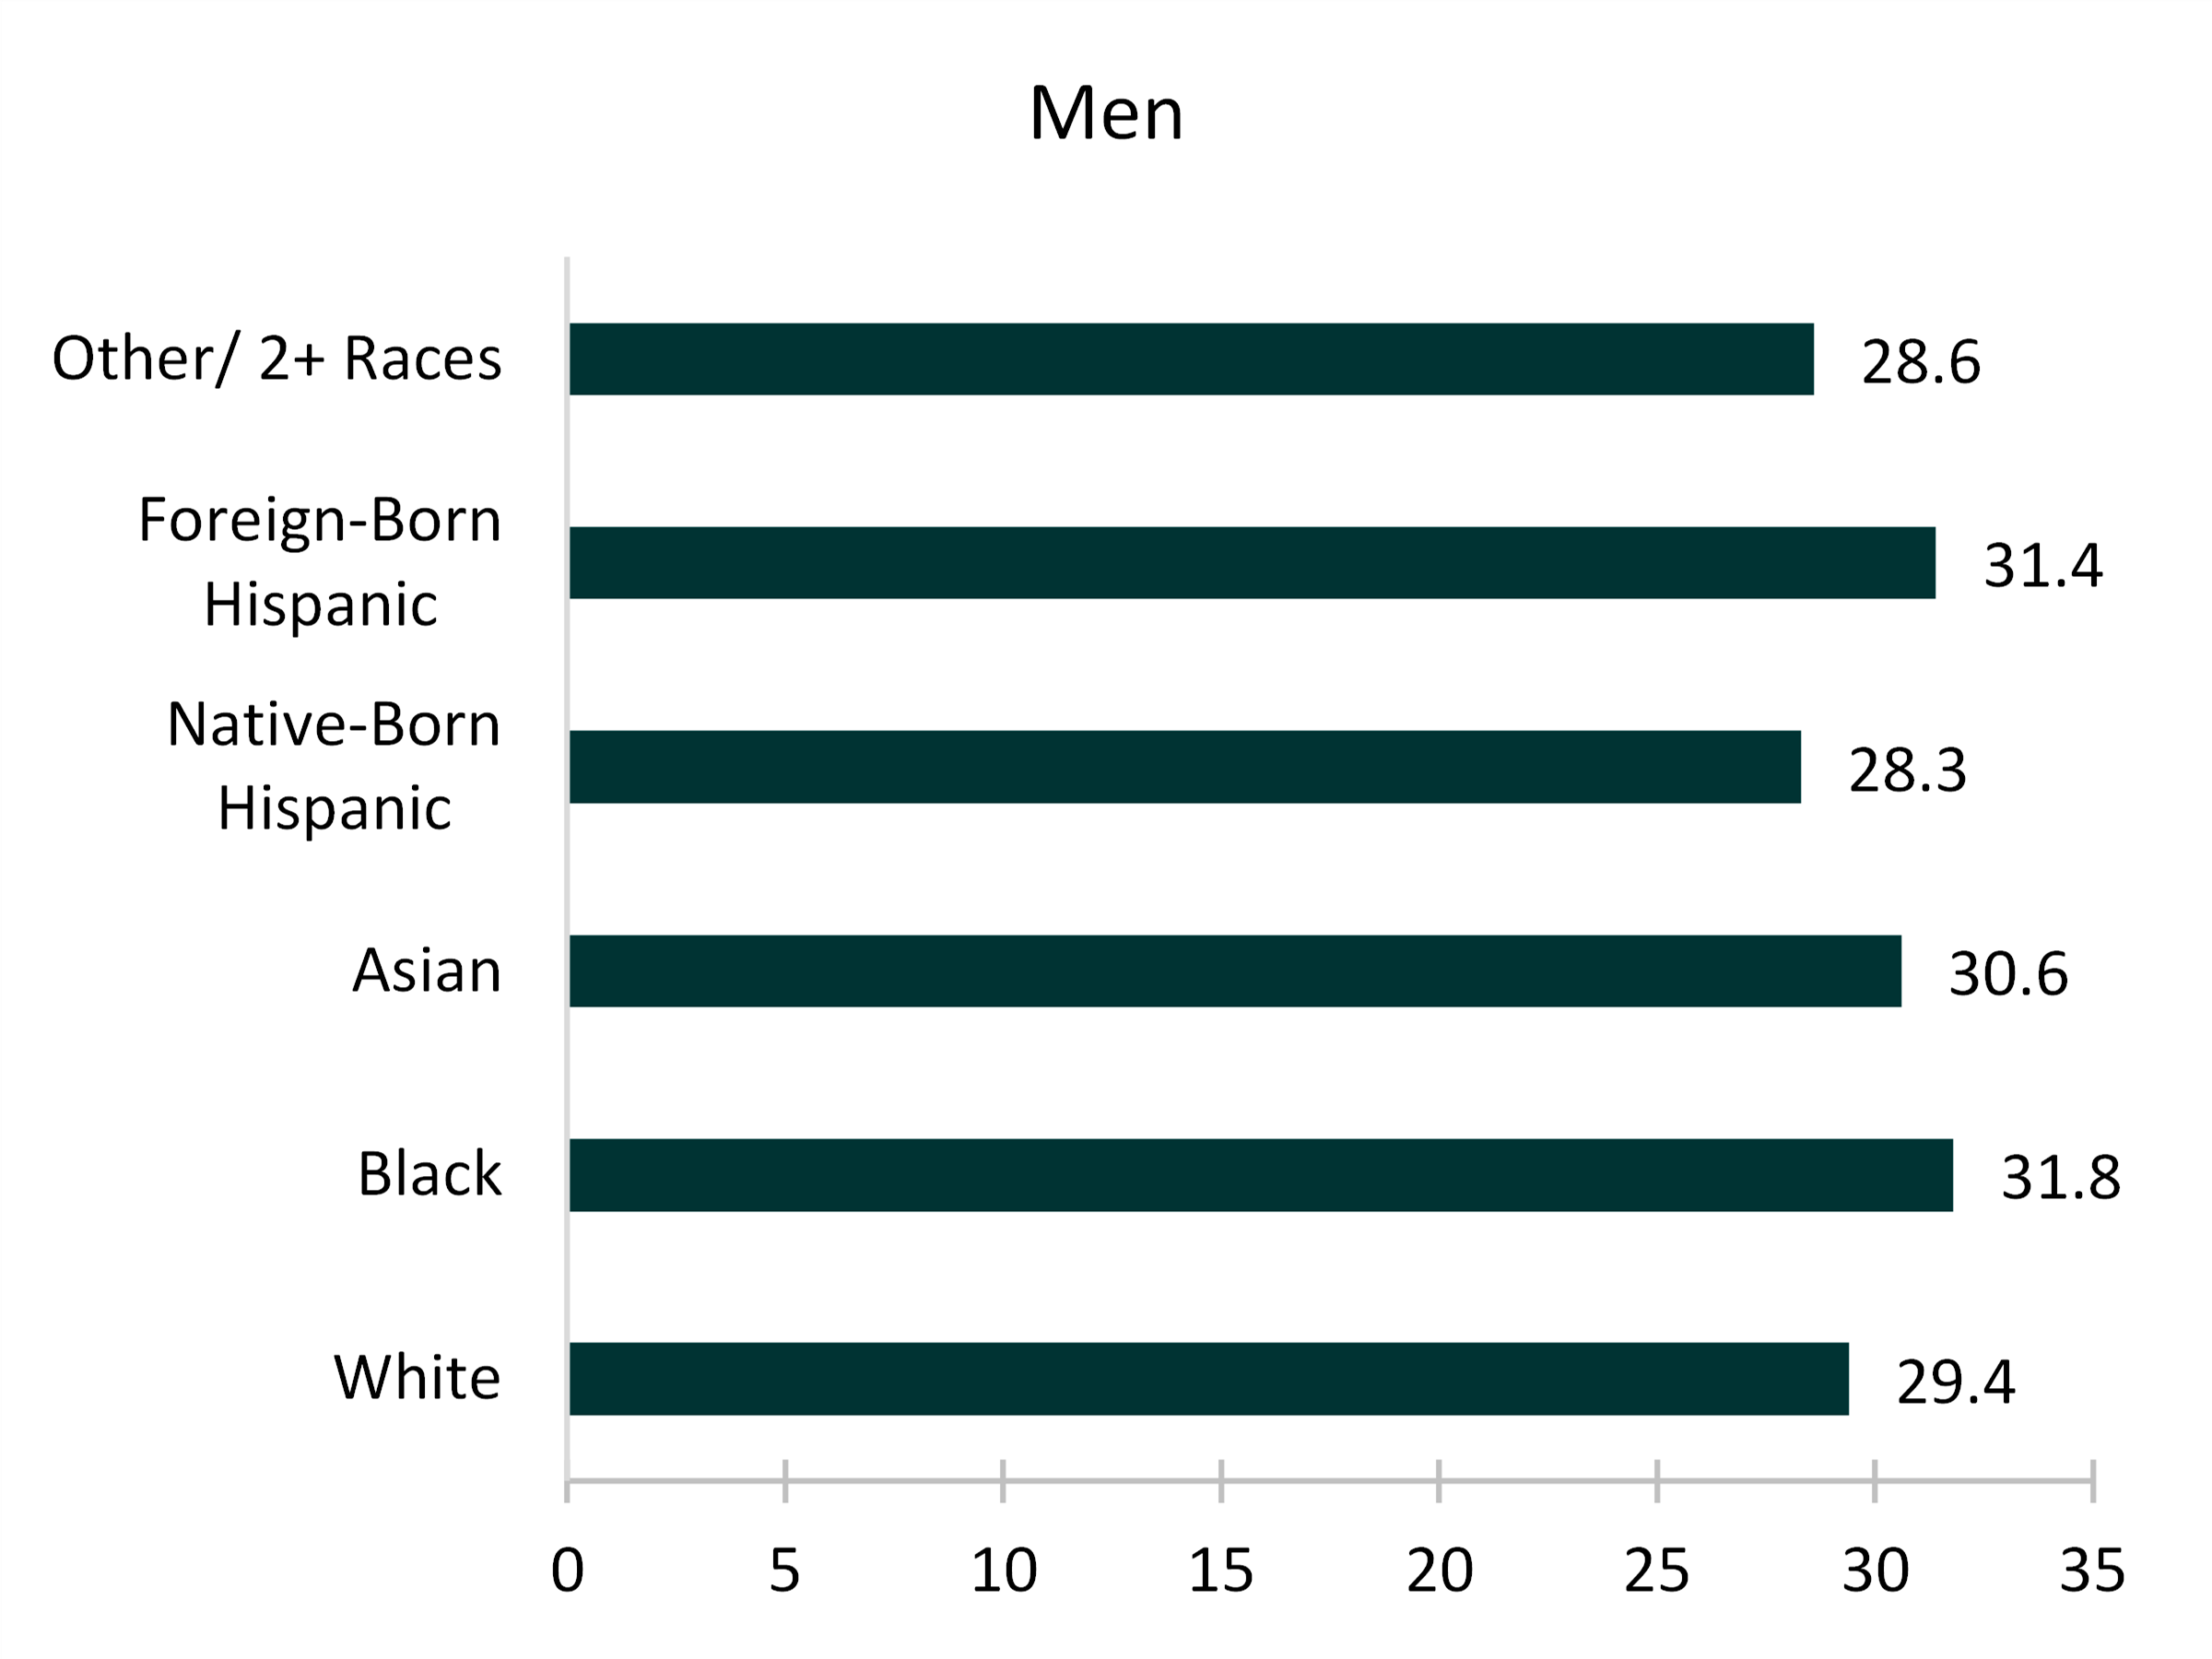 teal bar chart showing men Figure 2. Median Age at First Marriage by Race and Ethnicity, 2019